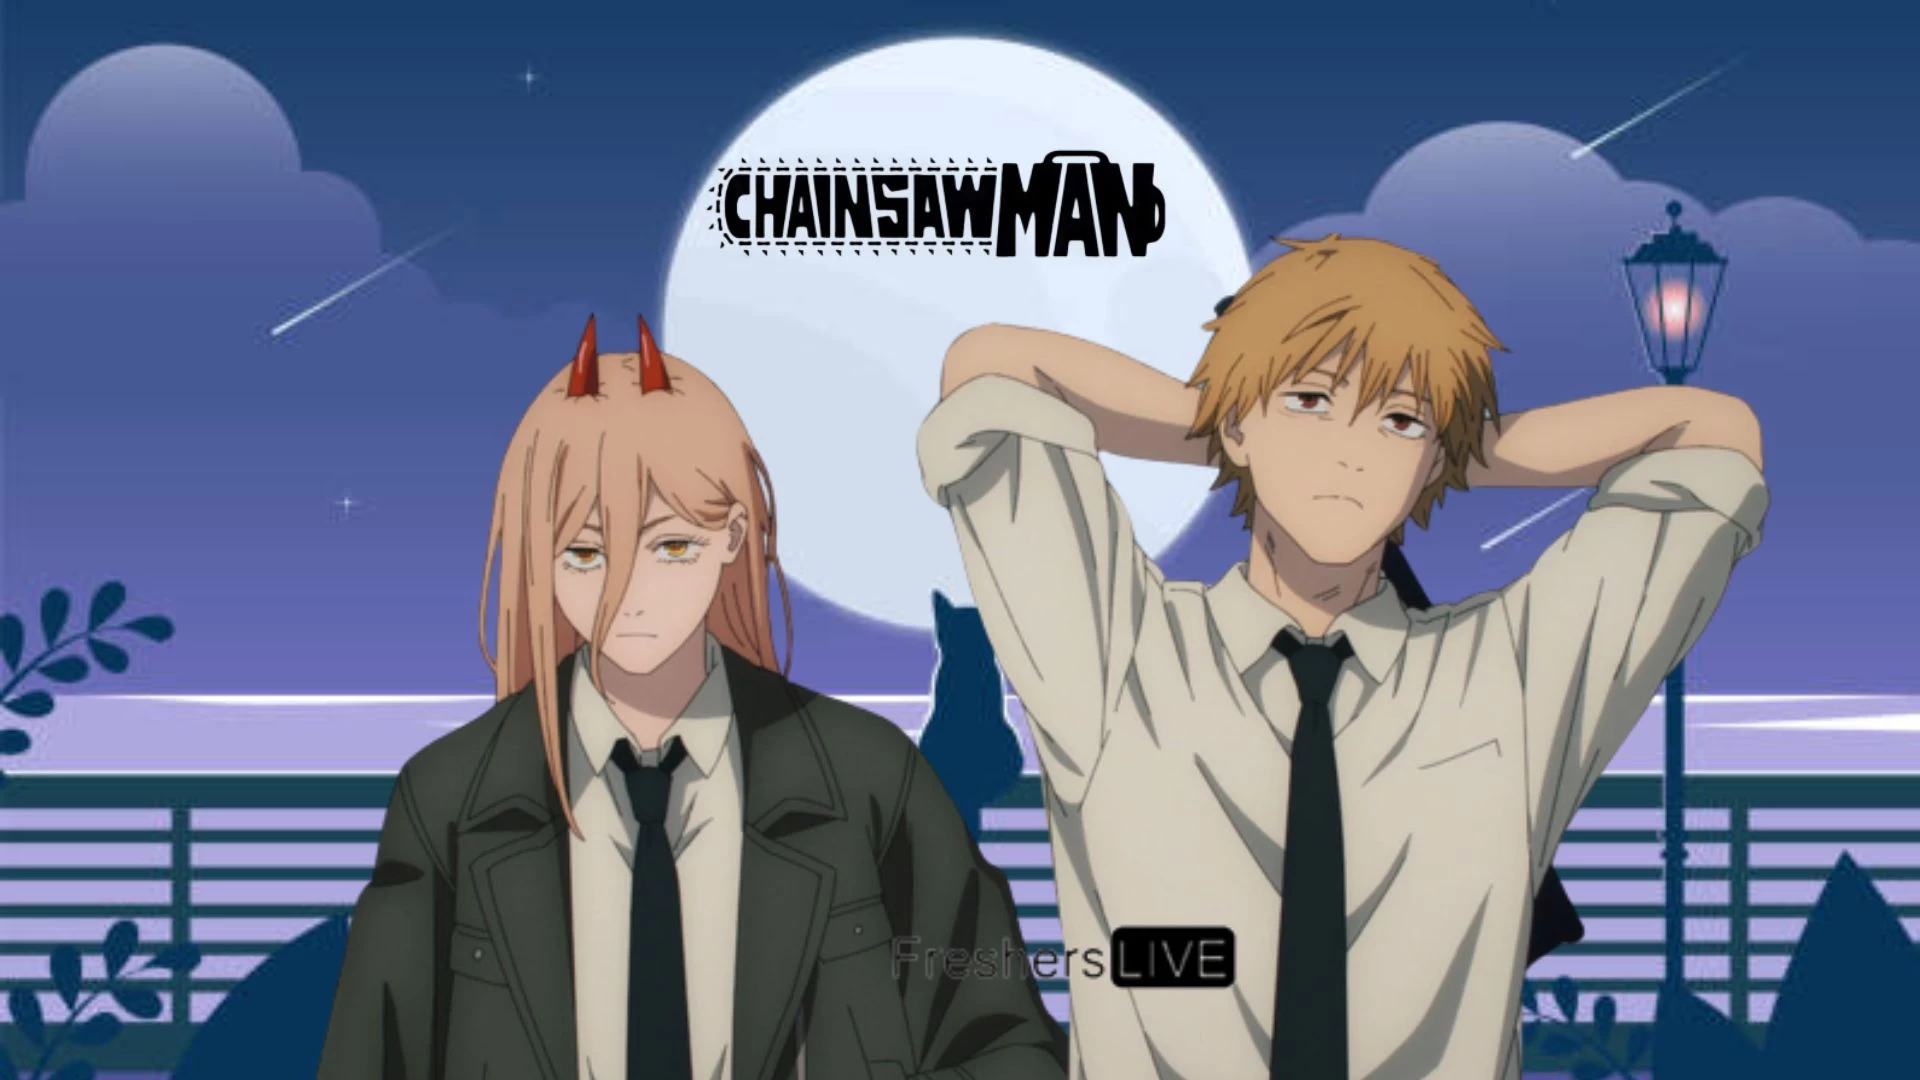 Is Chainsaw Man Getting a Season 2? When is Chainsaw Man 2 Coming Out? Chainsaw Man 2 Release Date